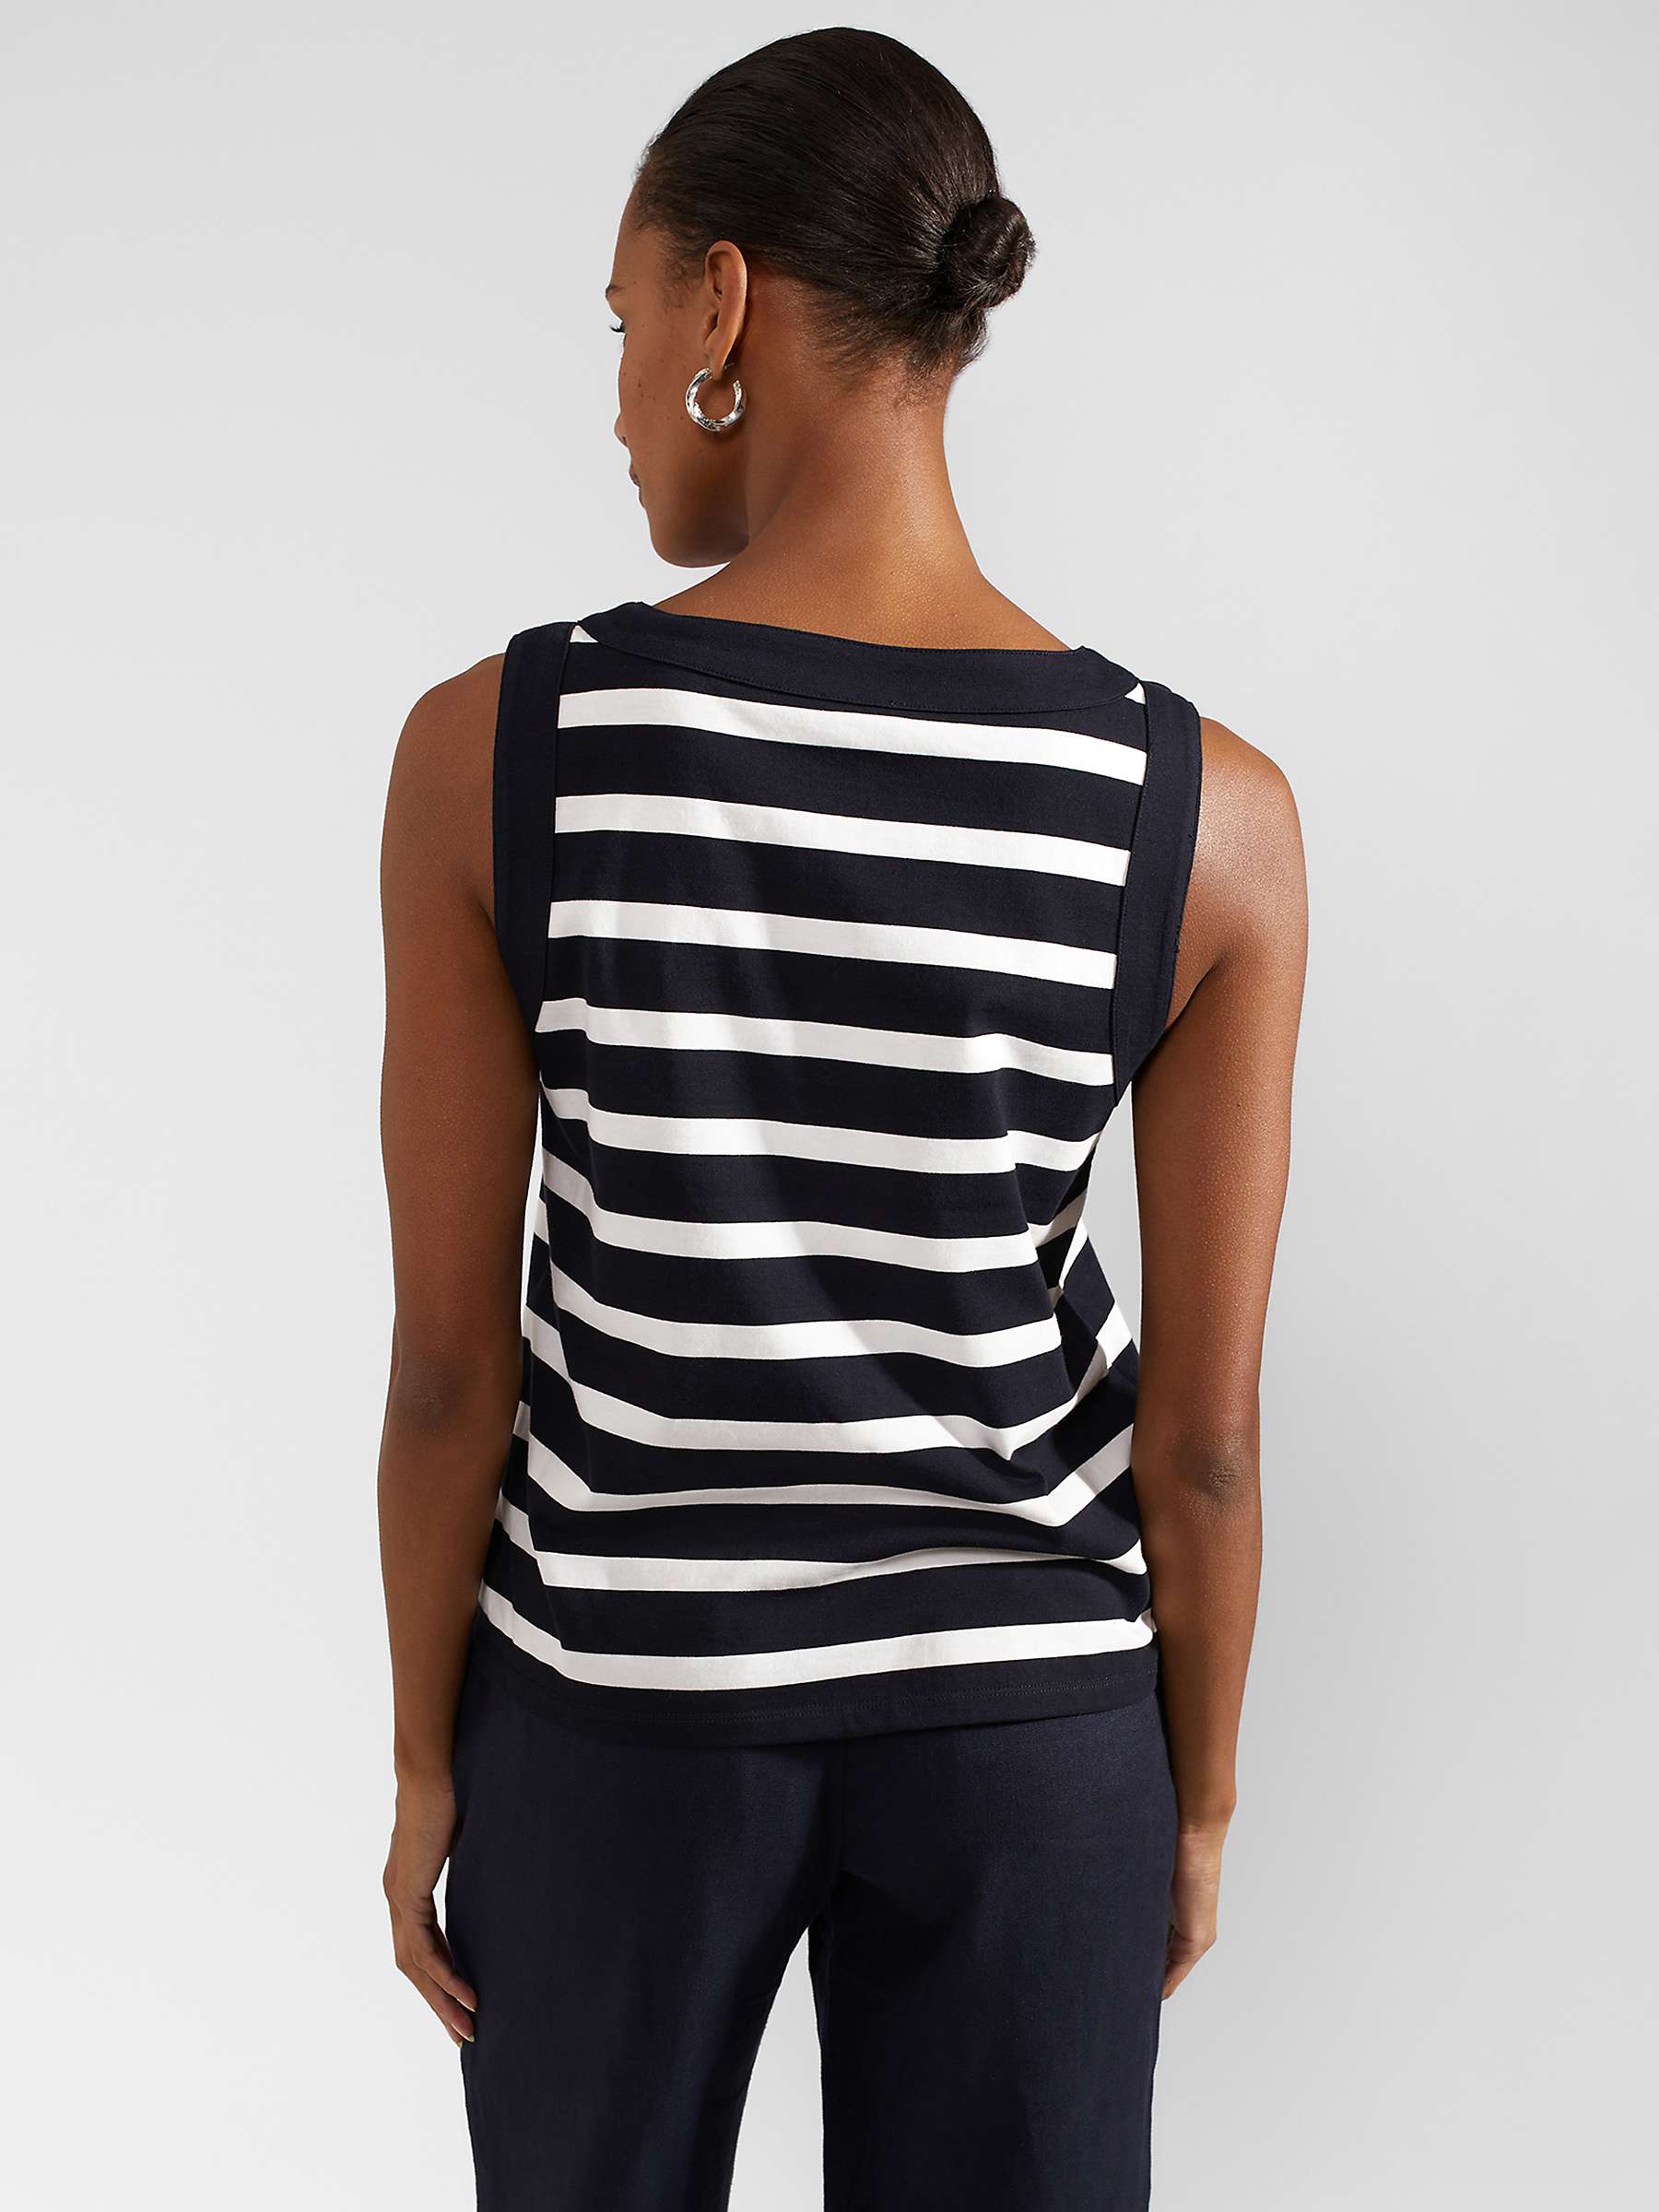 Buy Hobbs Maddy Cotton Sleeveless Top, Navy/Ivory Online at johnlewis.com